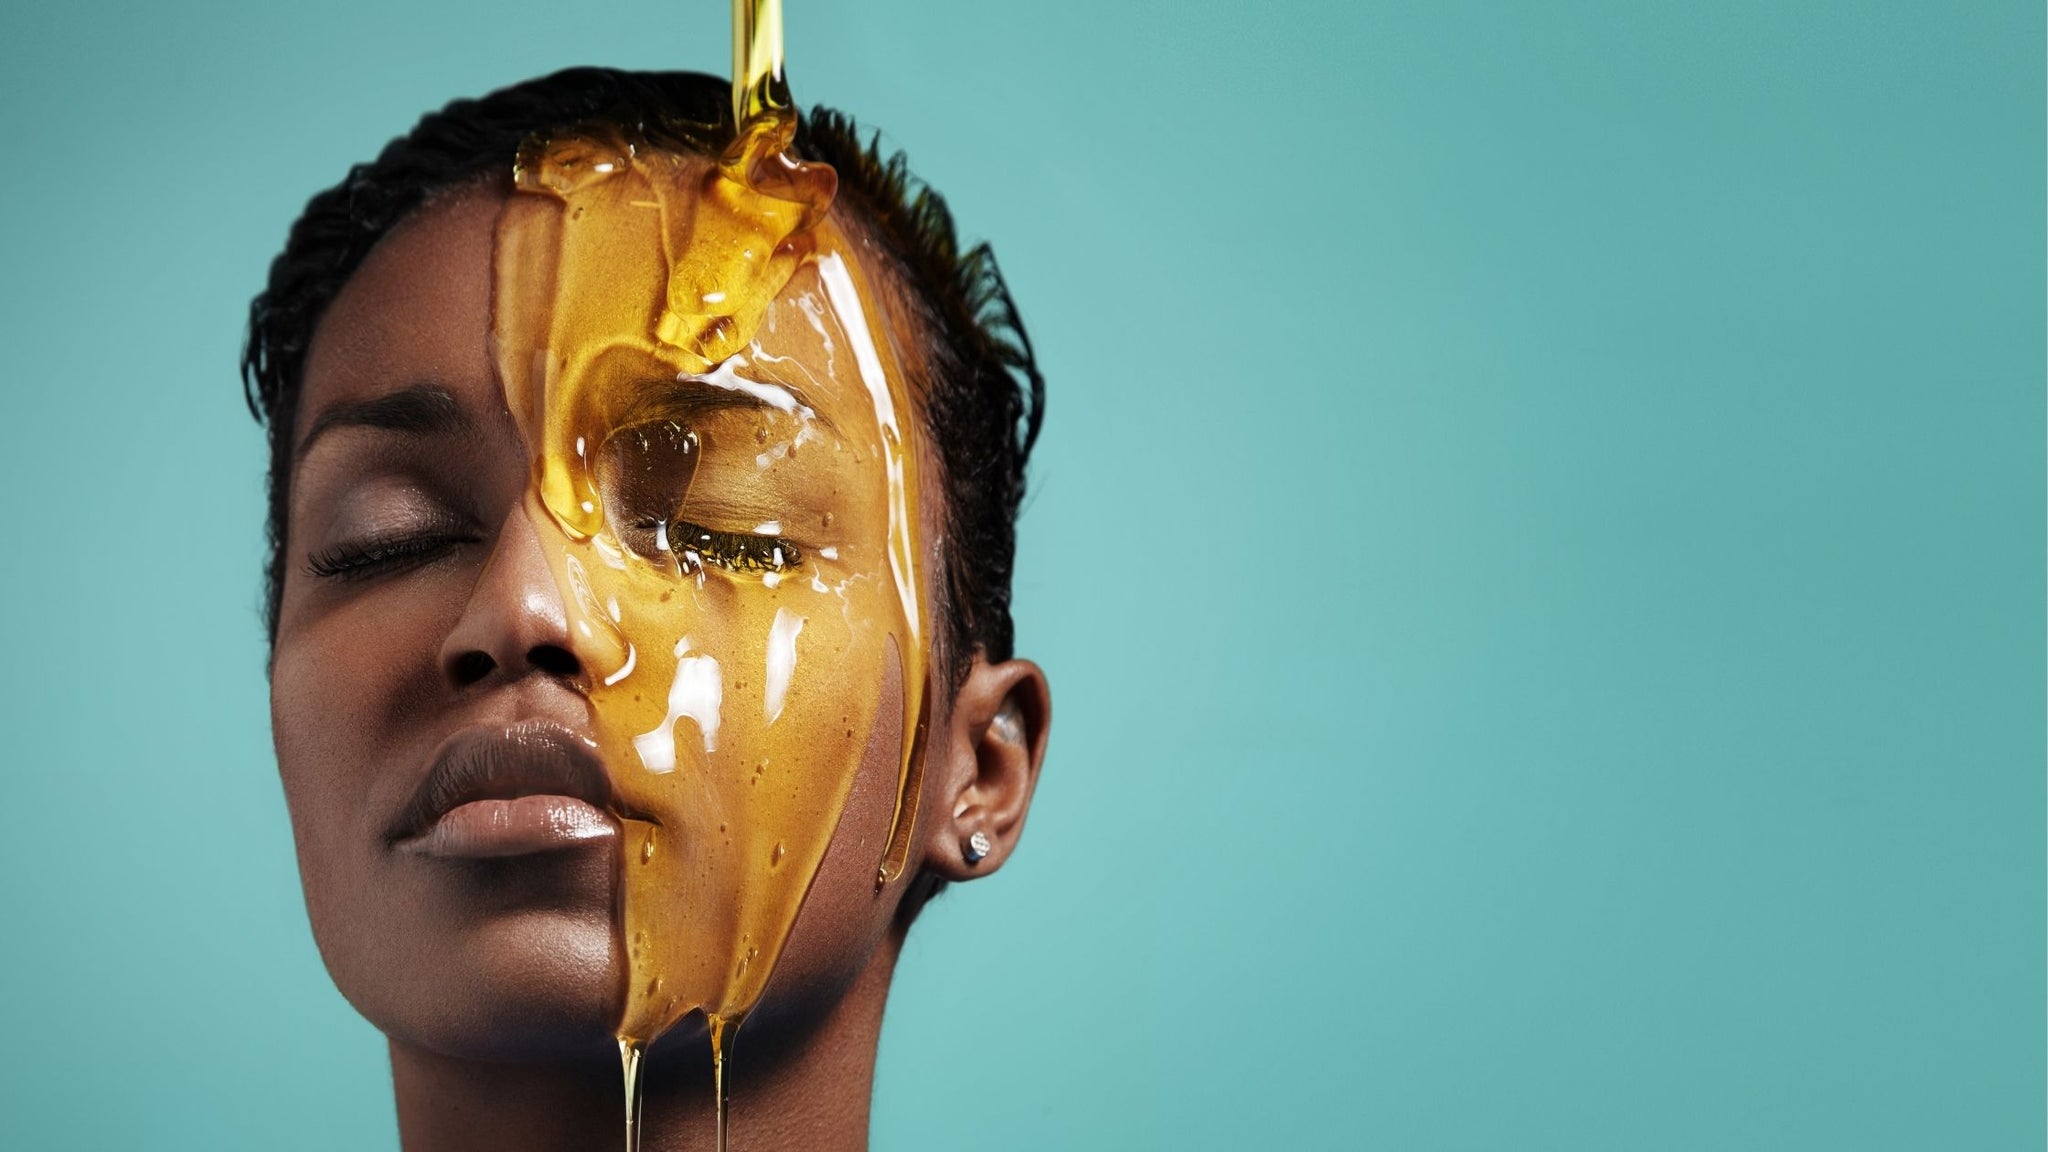 How To Use Honey for Acne - The Many Benefits of Honey